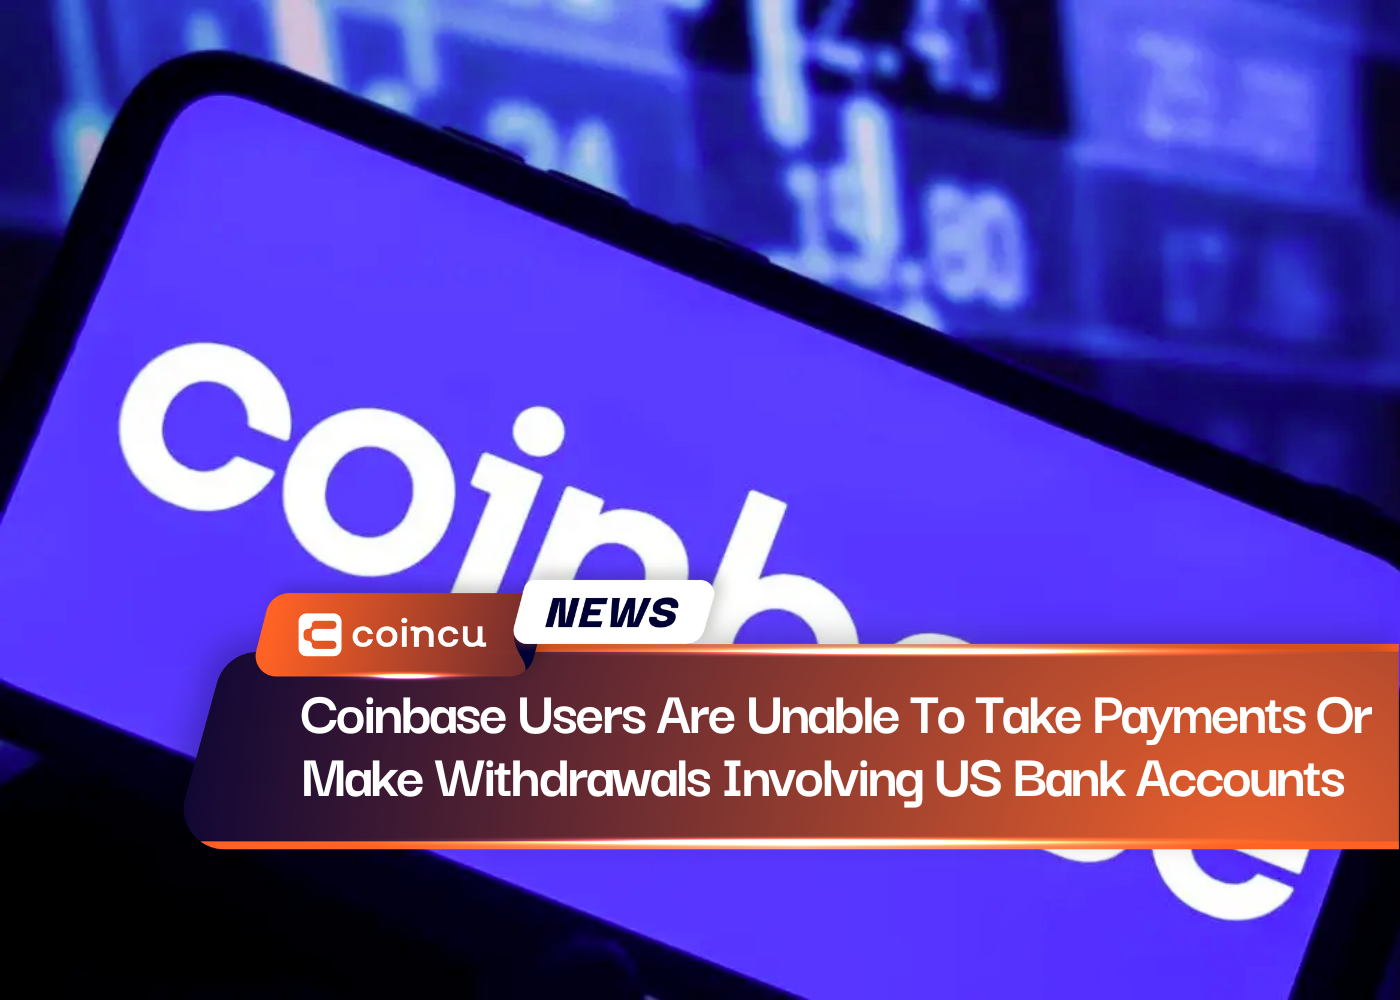 Coinbase Users Are Unable To Take Payments Or Make Withdrawals Involving US Bank Accounts